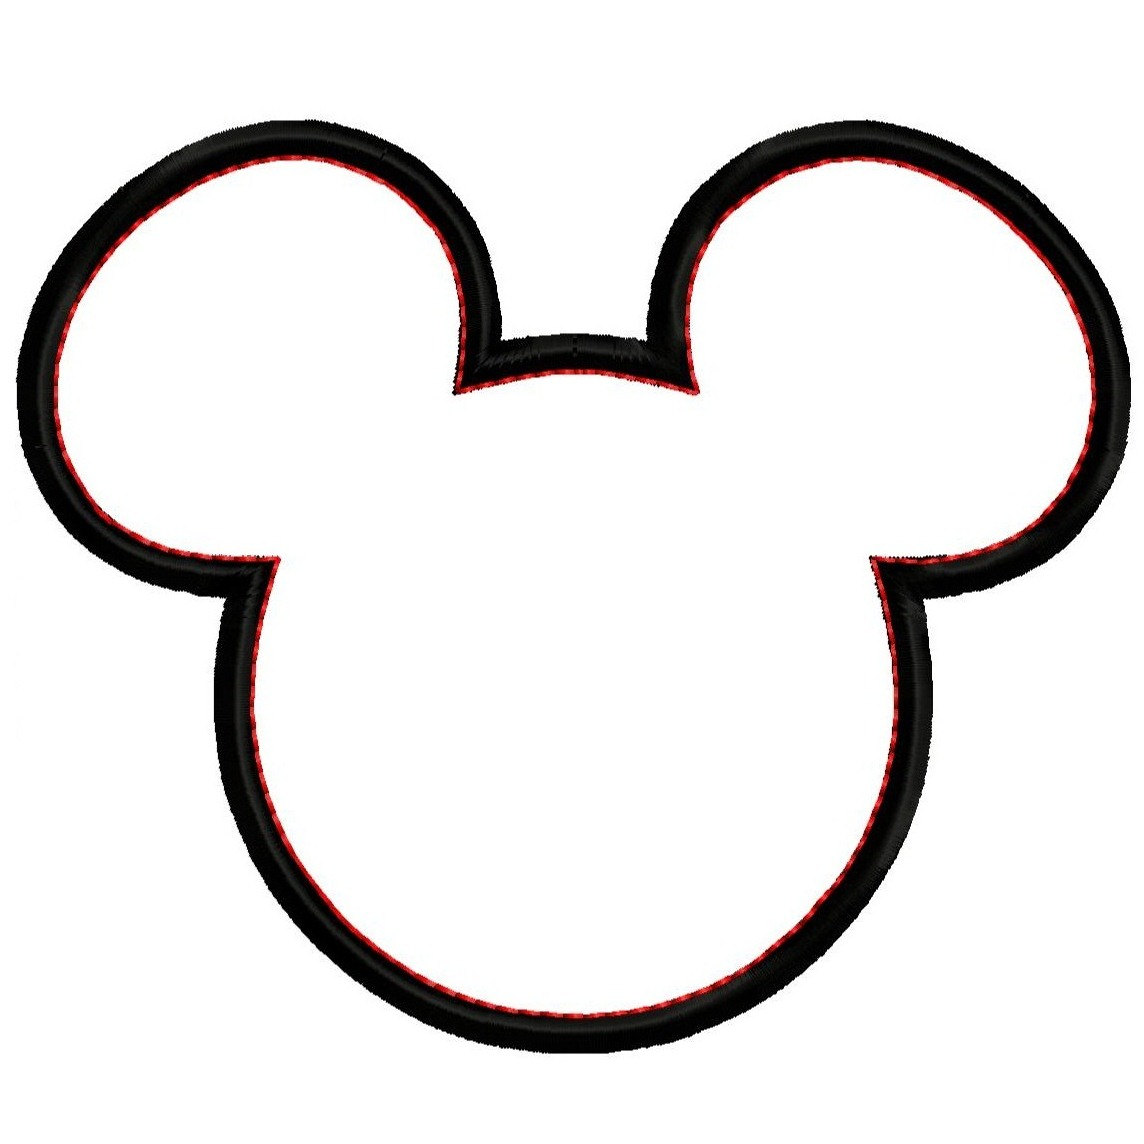 Disney World Silhouette at GetDrawings | Free download